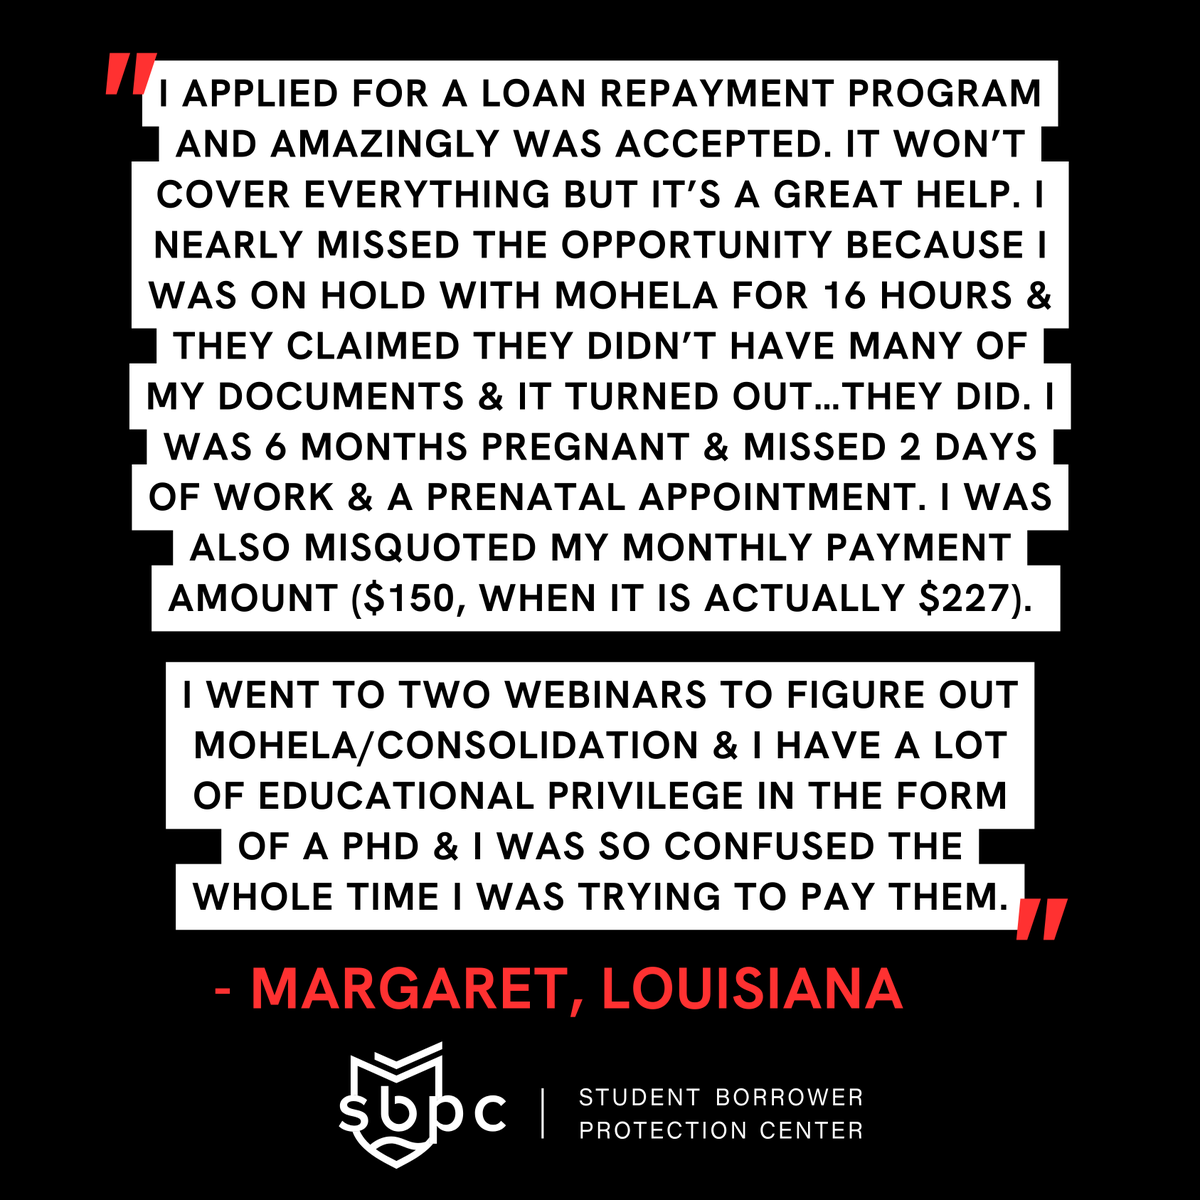 'I went to two webinars to figure out MOHELA/consolidation and I have a lot of educational privilege in the form of a PhD and I was so confused the whole time I was trying to pay them.' —Margaret, Louisiana